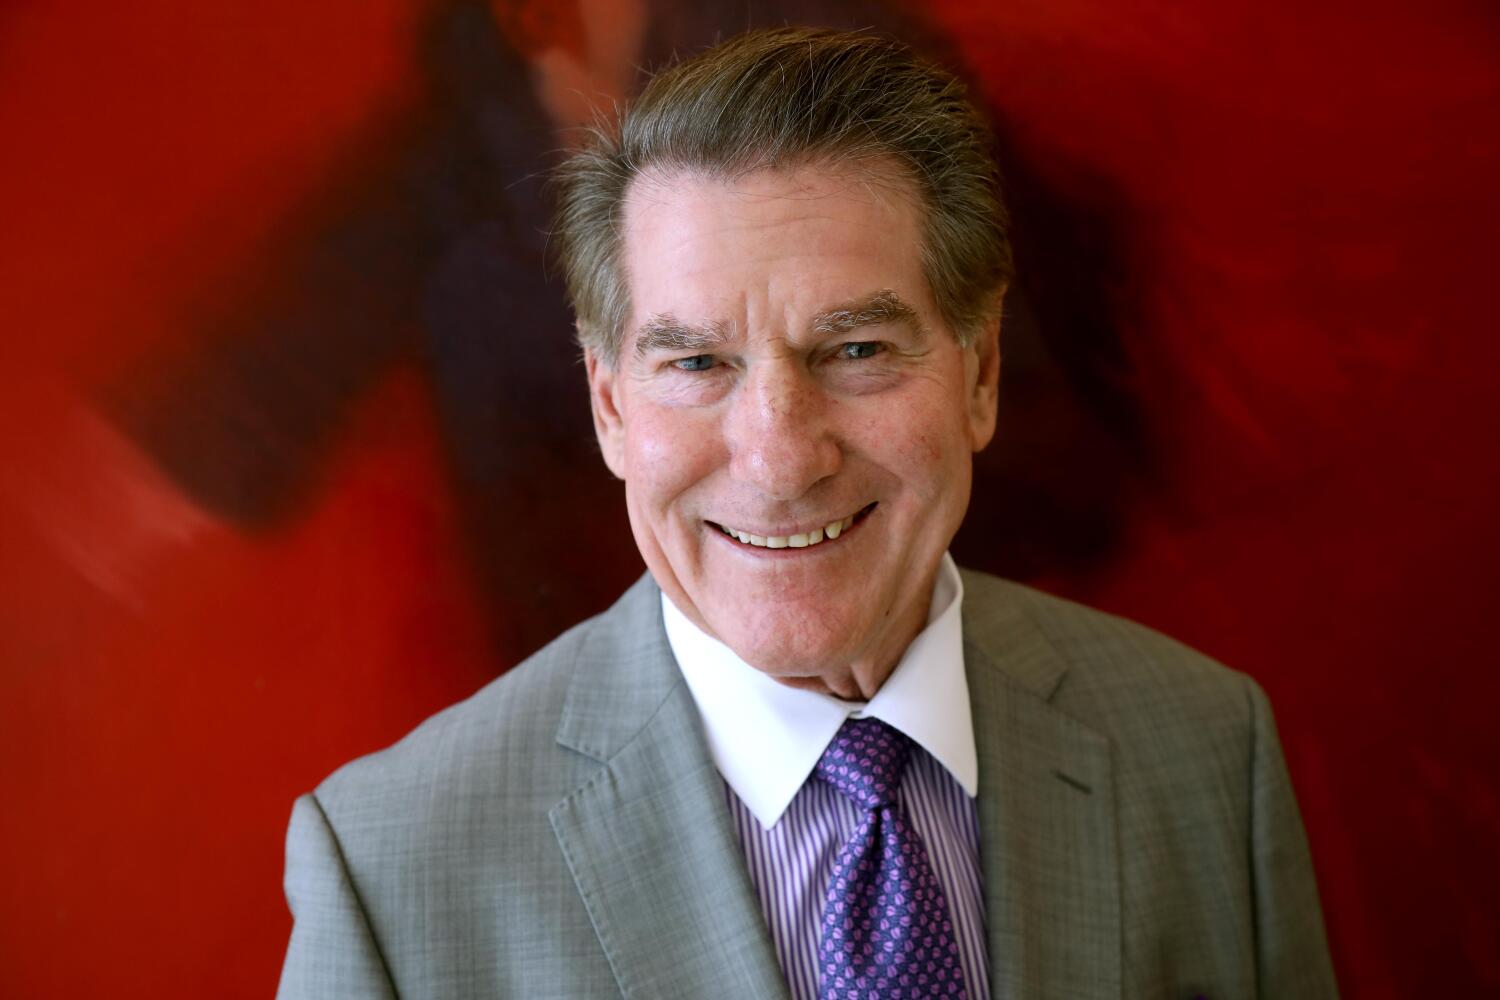 Editorial: Steve Garvey wants to make the California GOP relevant again. Good luck with that